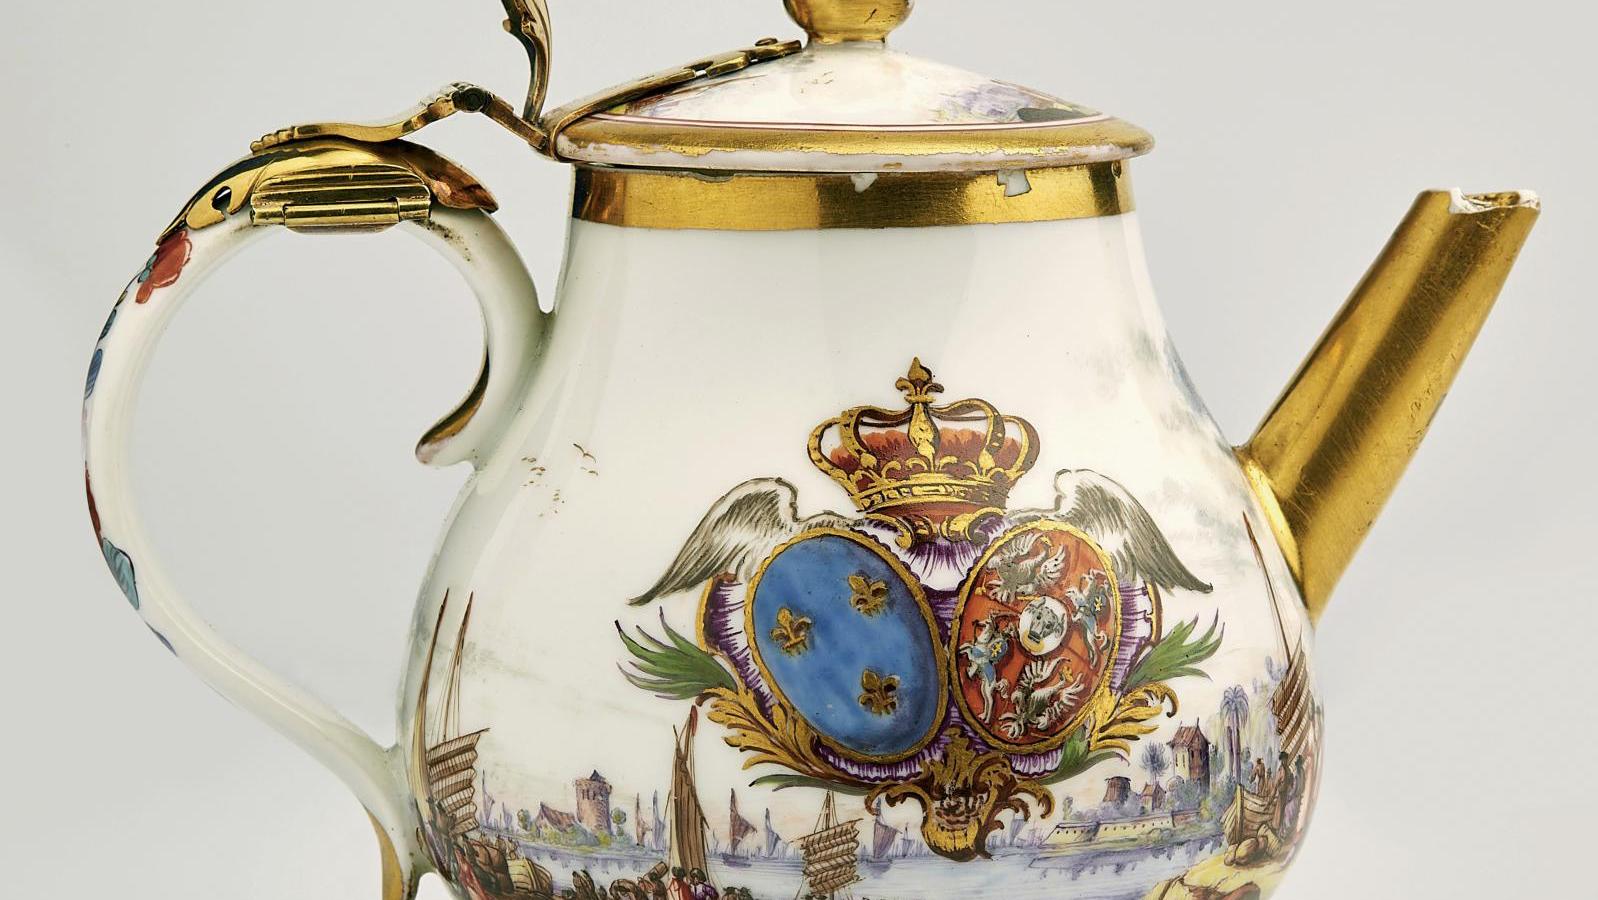 Meissen porcelain lidded teapot from the service given to Queen Marie Leszczynska... A Meissen Teapot For French Queen Marie Leszczynska 